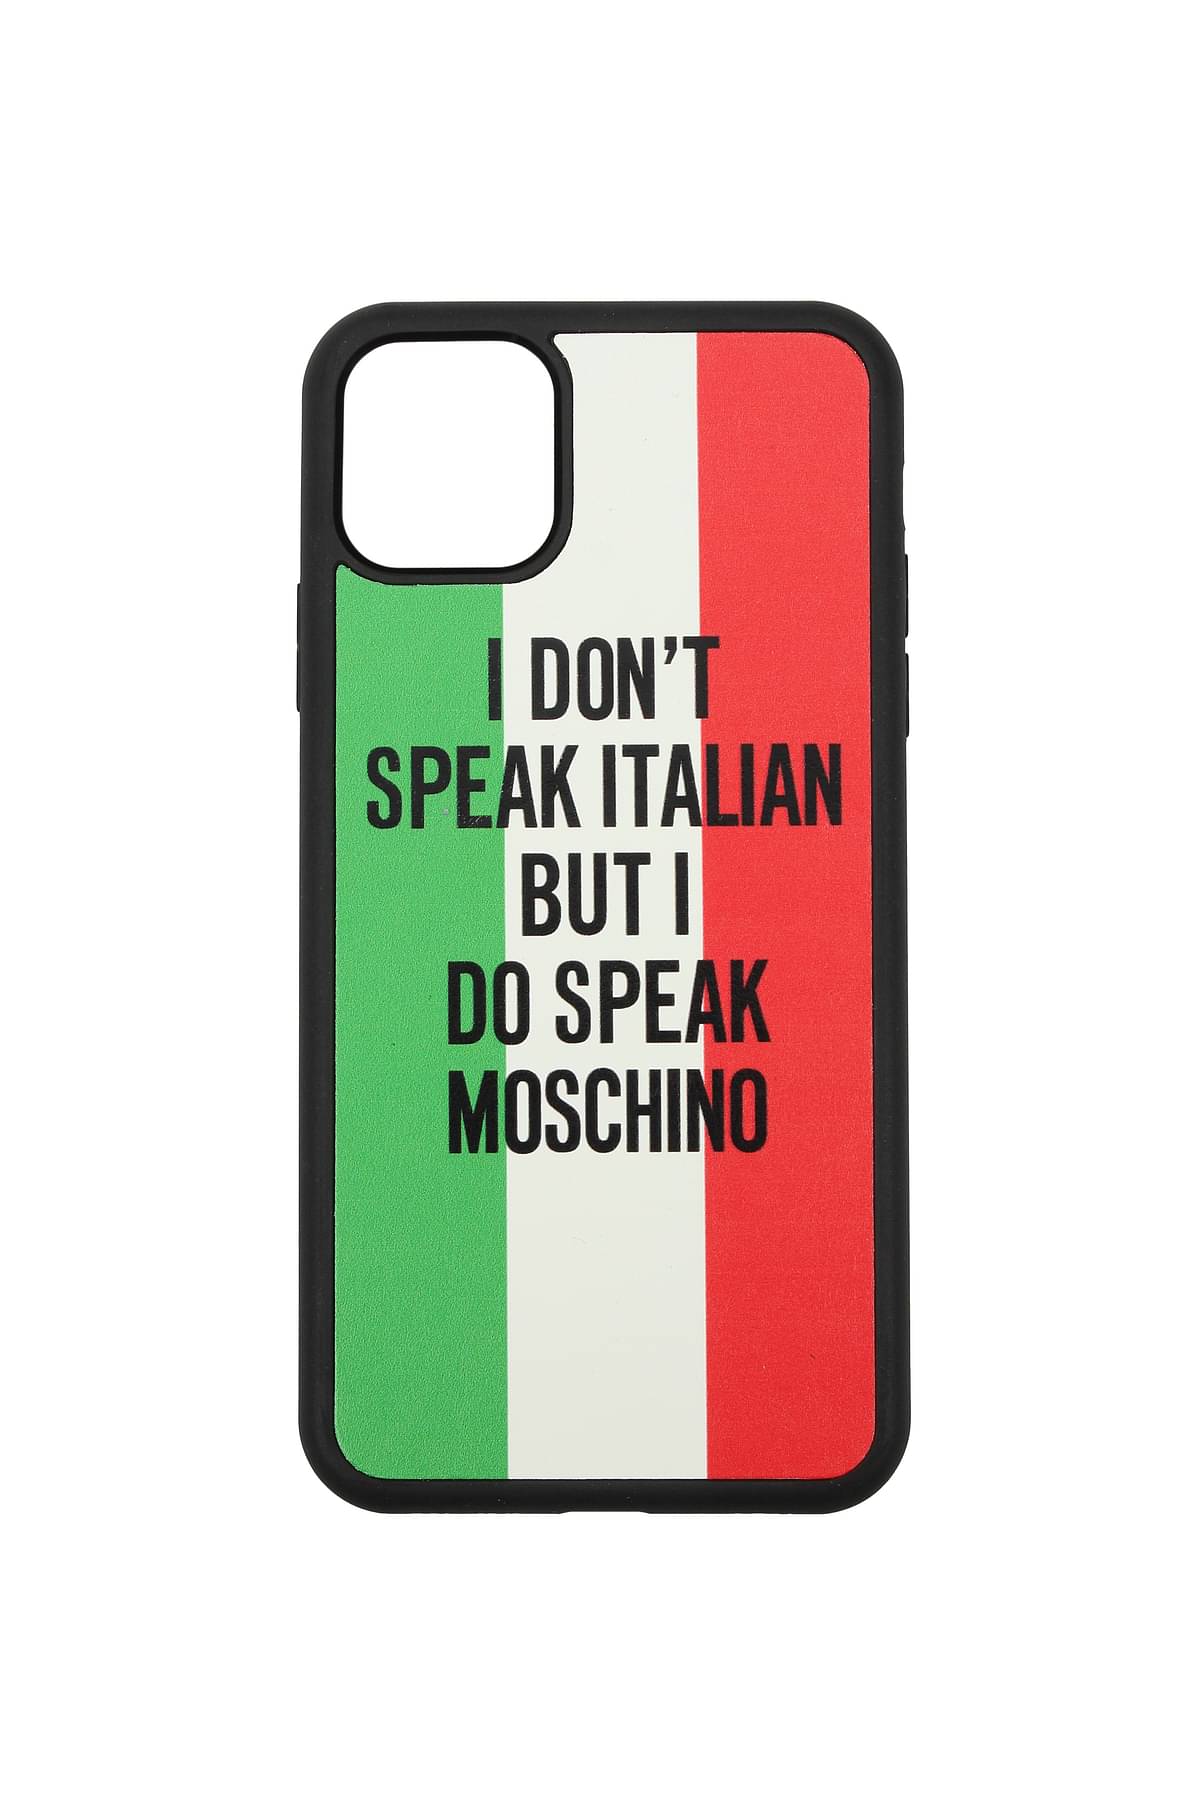 Moschino iPhone cover iphone 11 Pro max Men A795183011888 Multicolor 28,88€